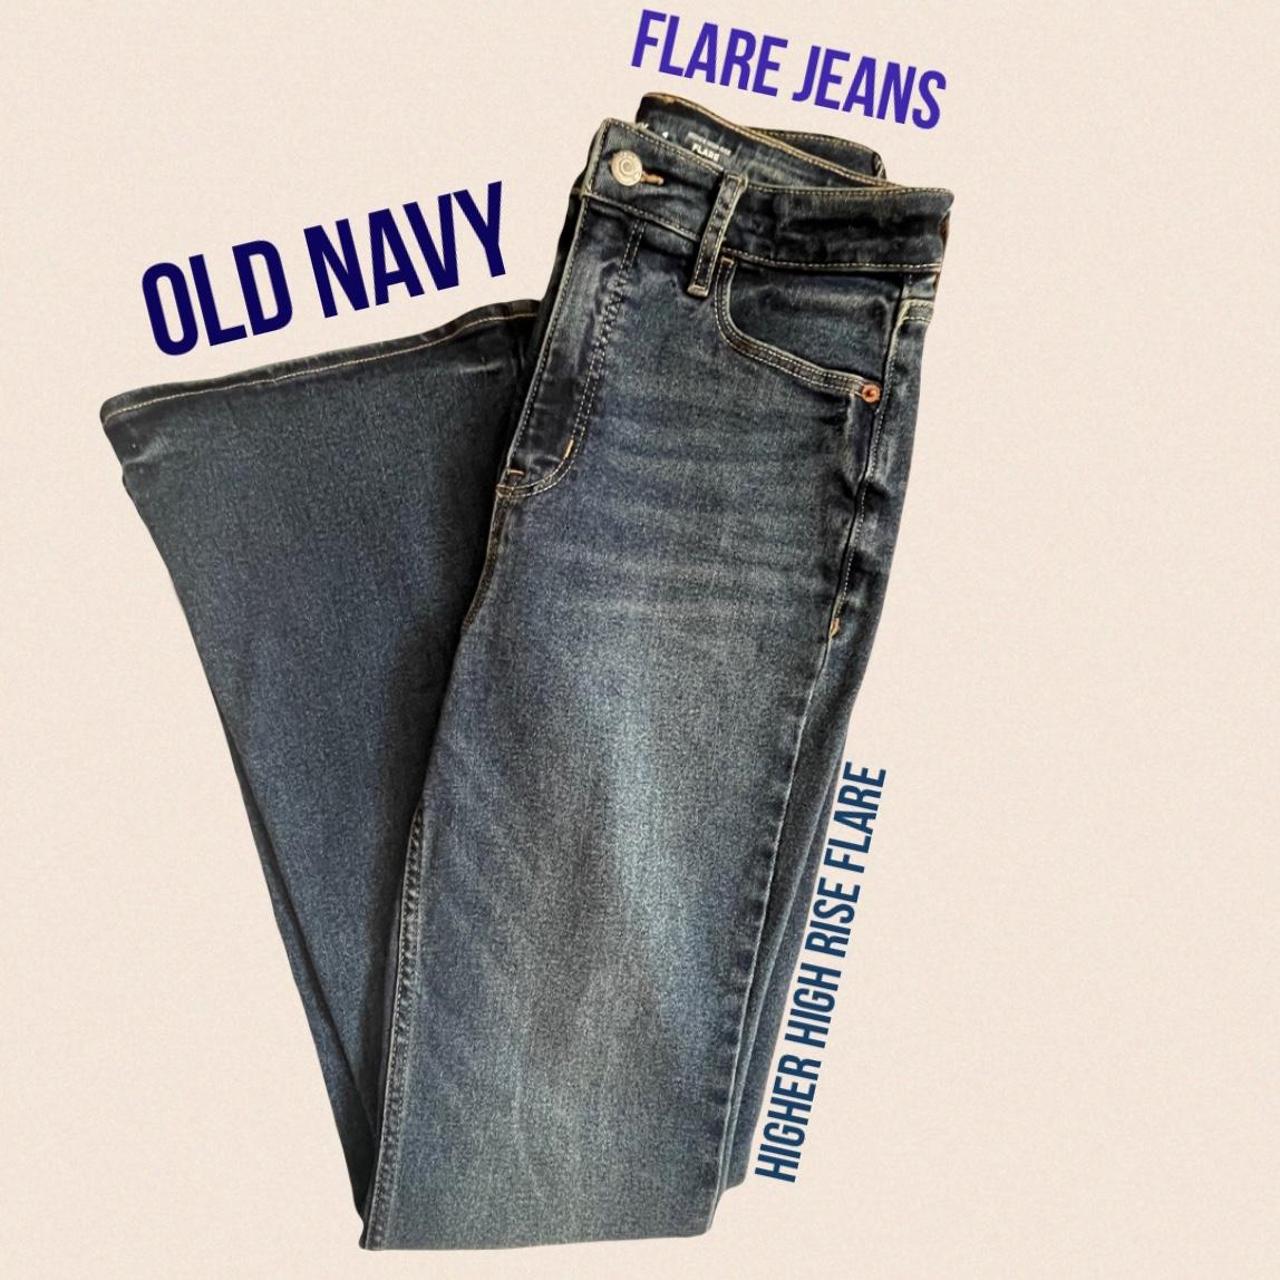 old navy flare jeans -a bit darker than picture - Depop